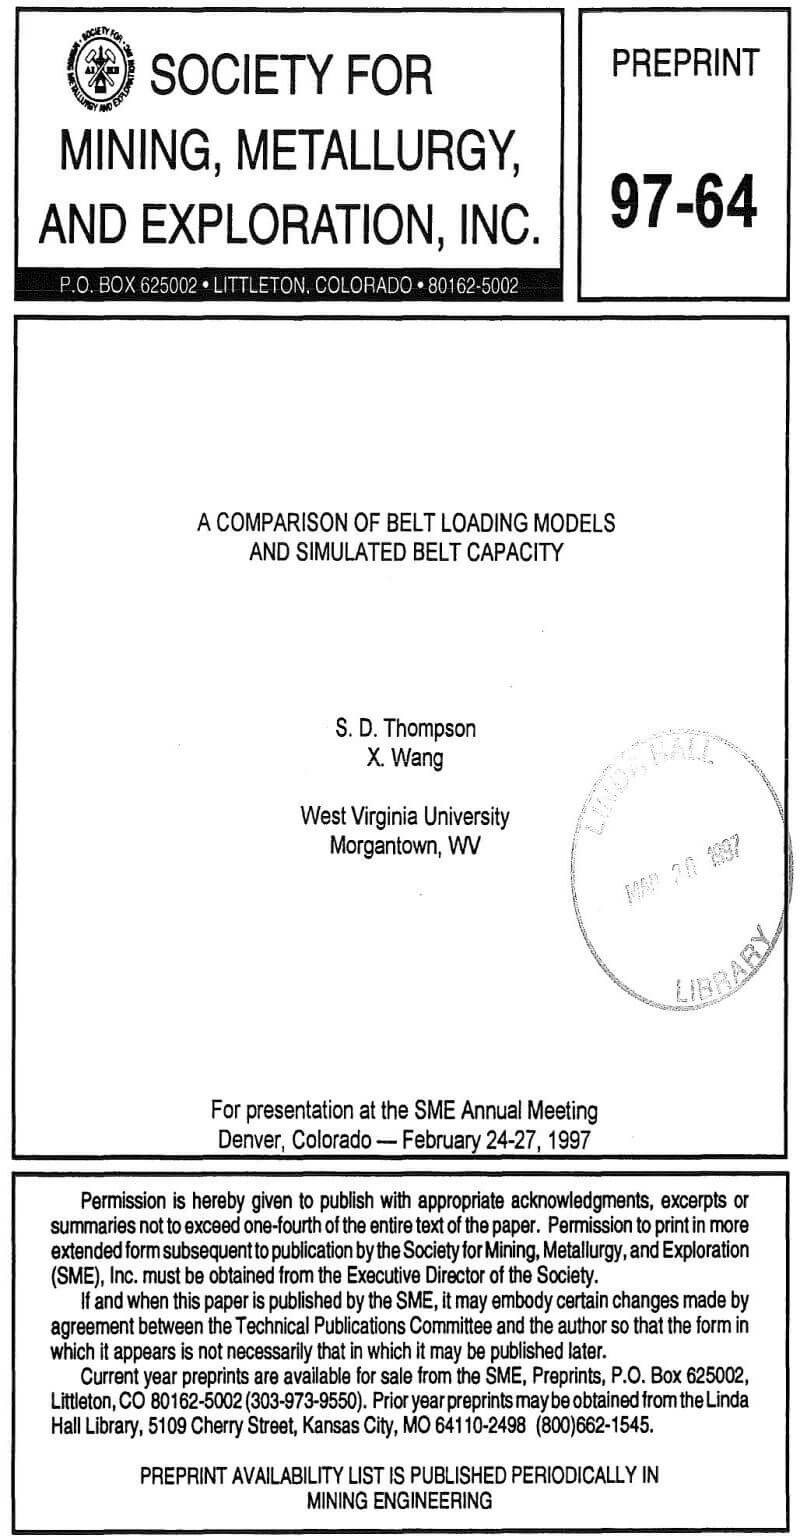 a comparison of belt loading models and simulated belt capacity